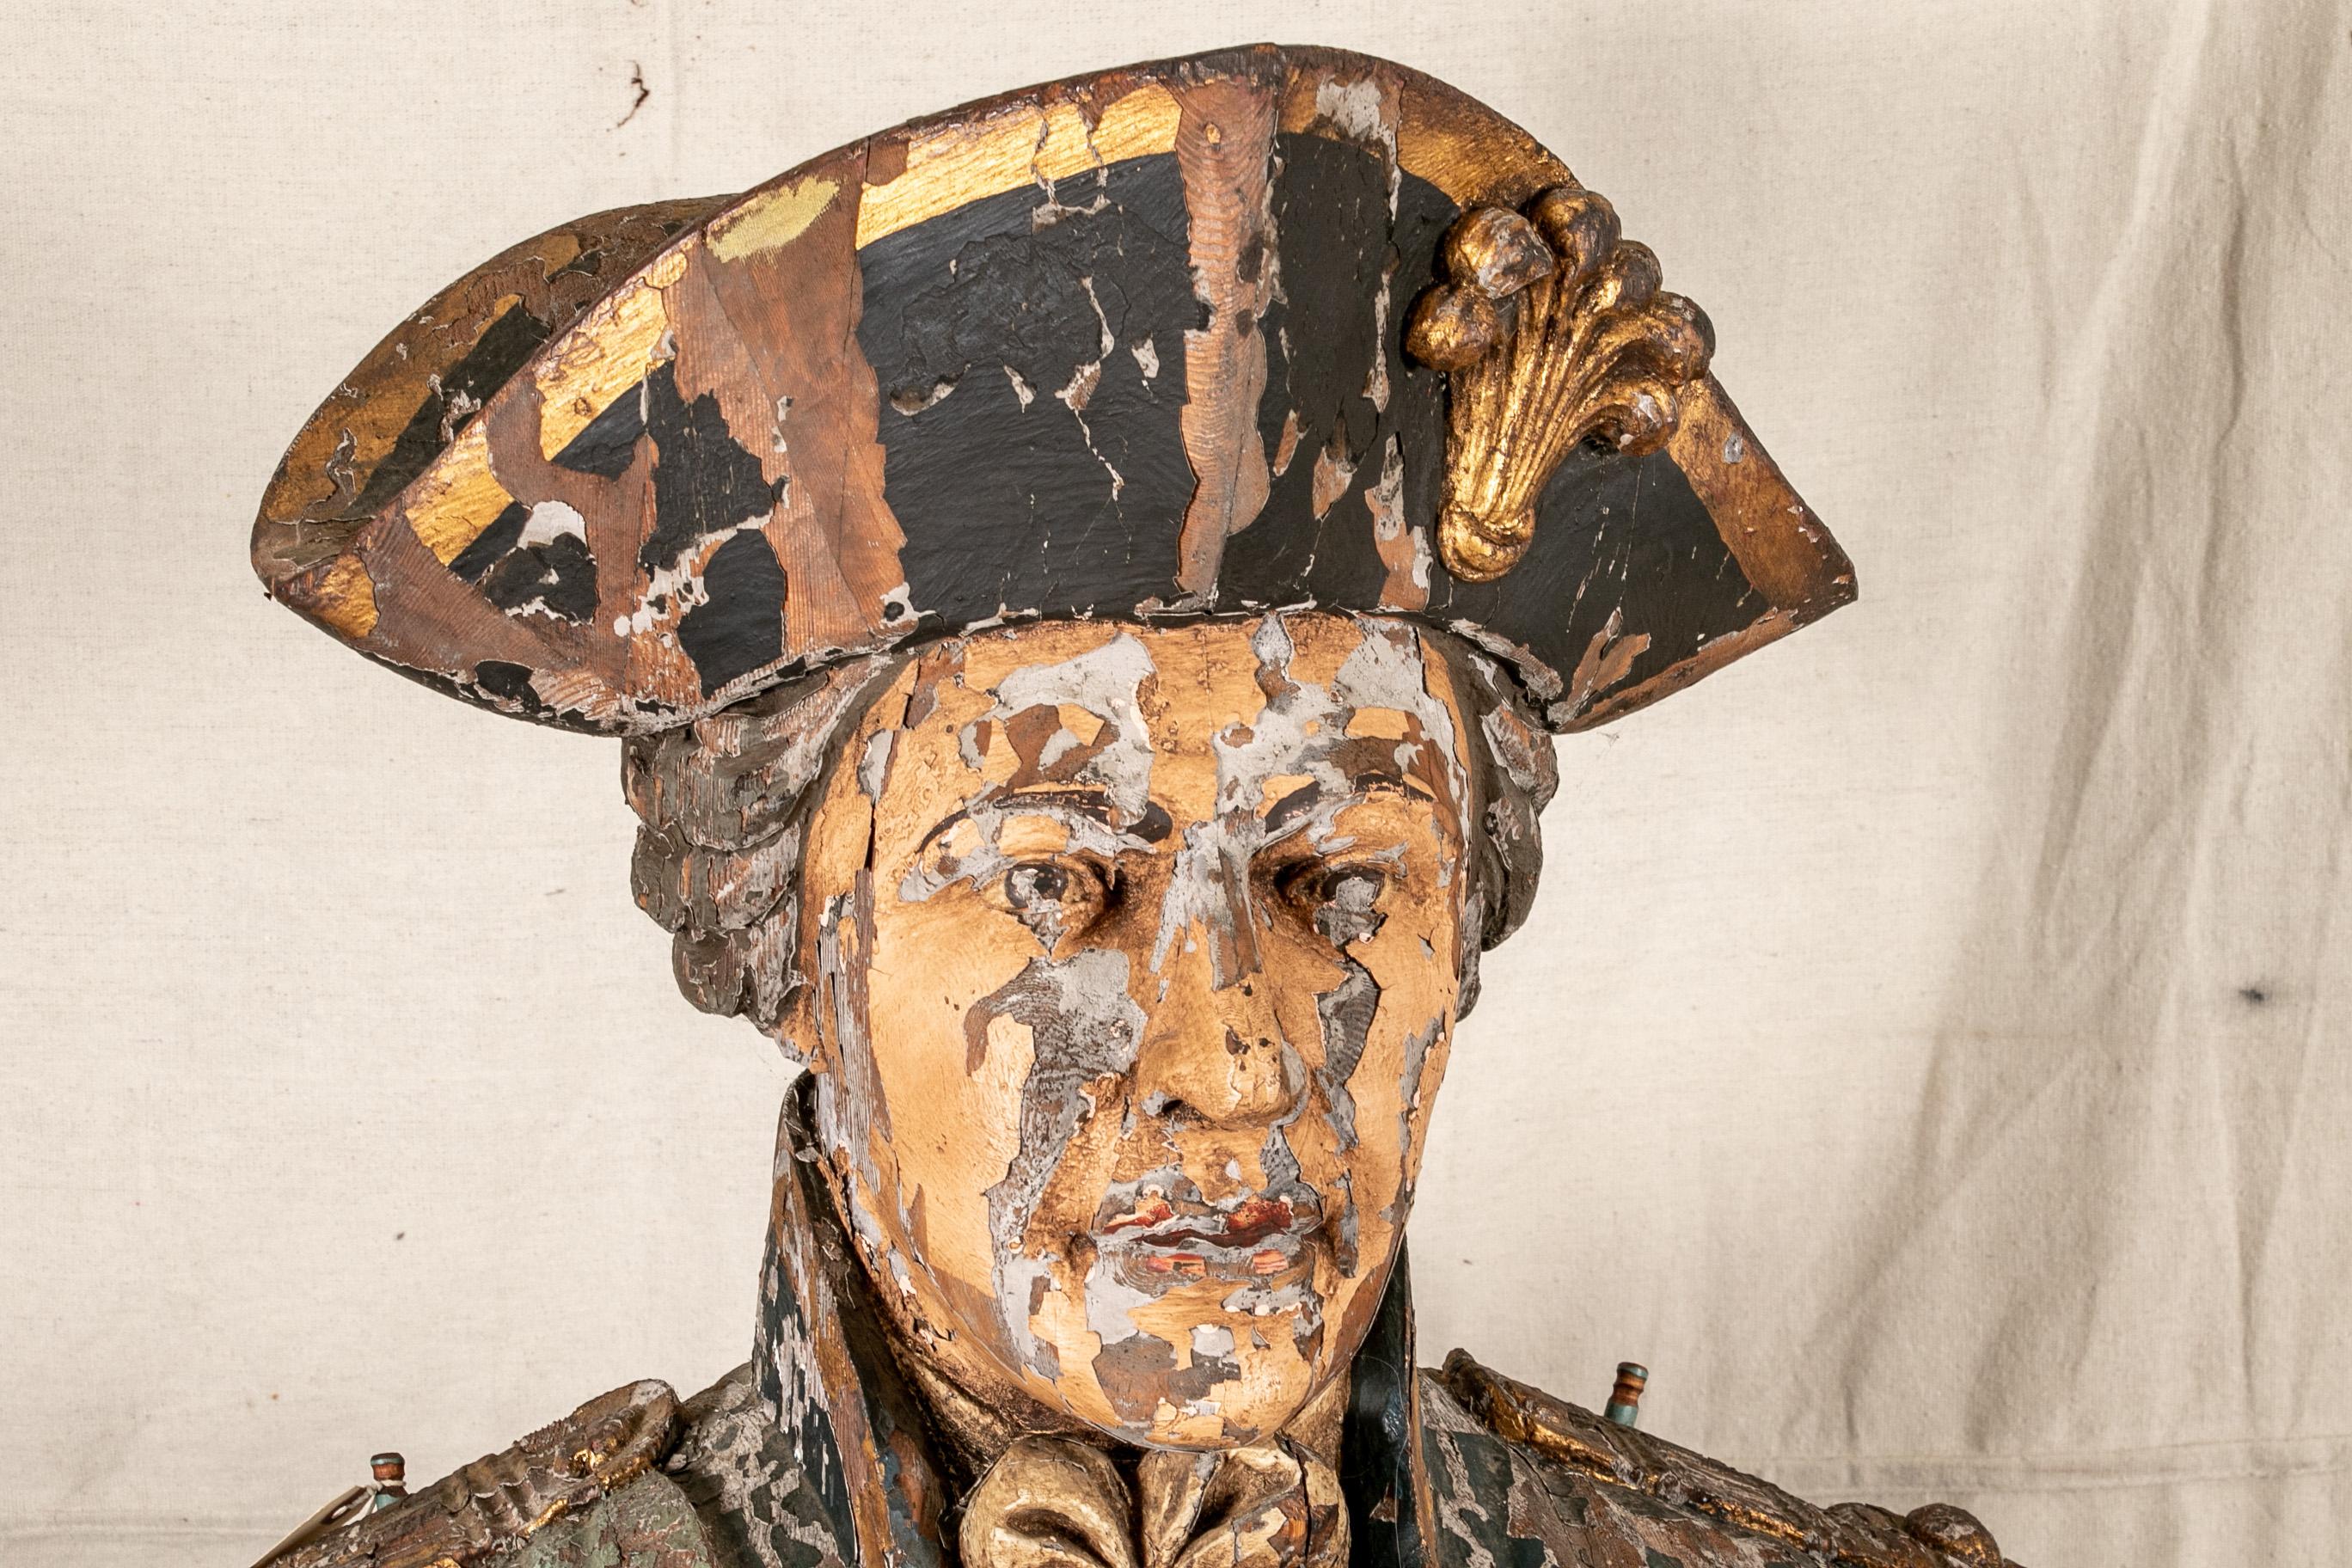 A fine massive and elaborate 18th/19th century English 
 hand carved, geso and paint decorated
ship's masthead of Admiral Horatio Lord Nelson. Traditionally carved in Maritime tradition and having great weight and excellent age/use patina.
Lord